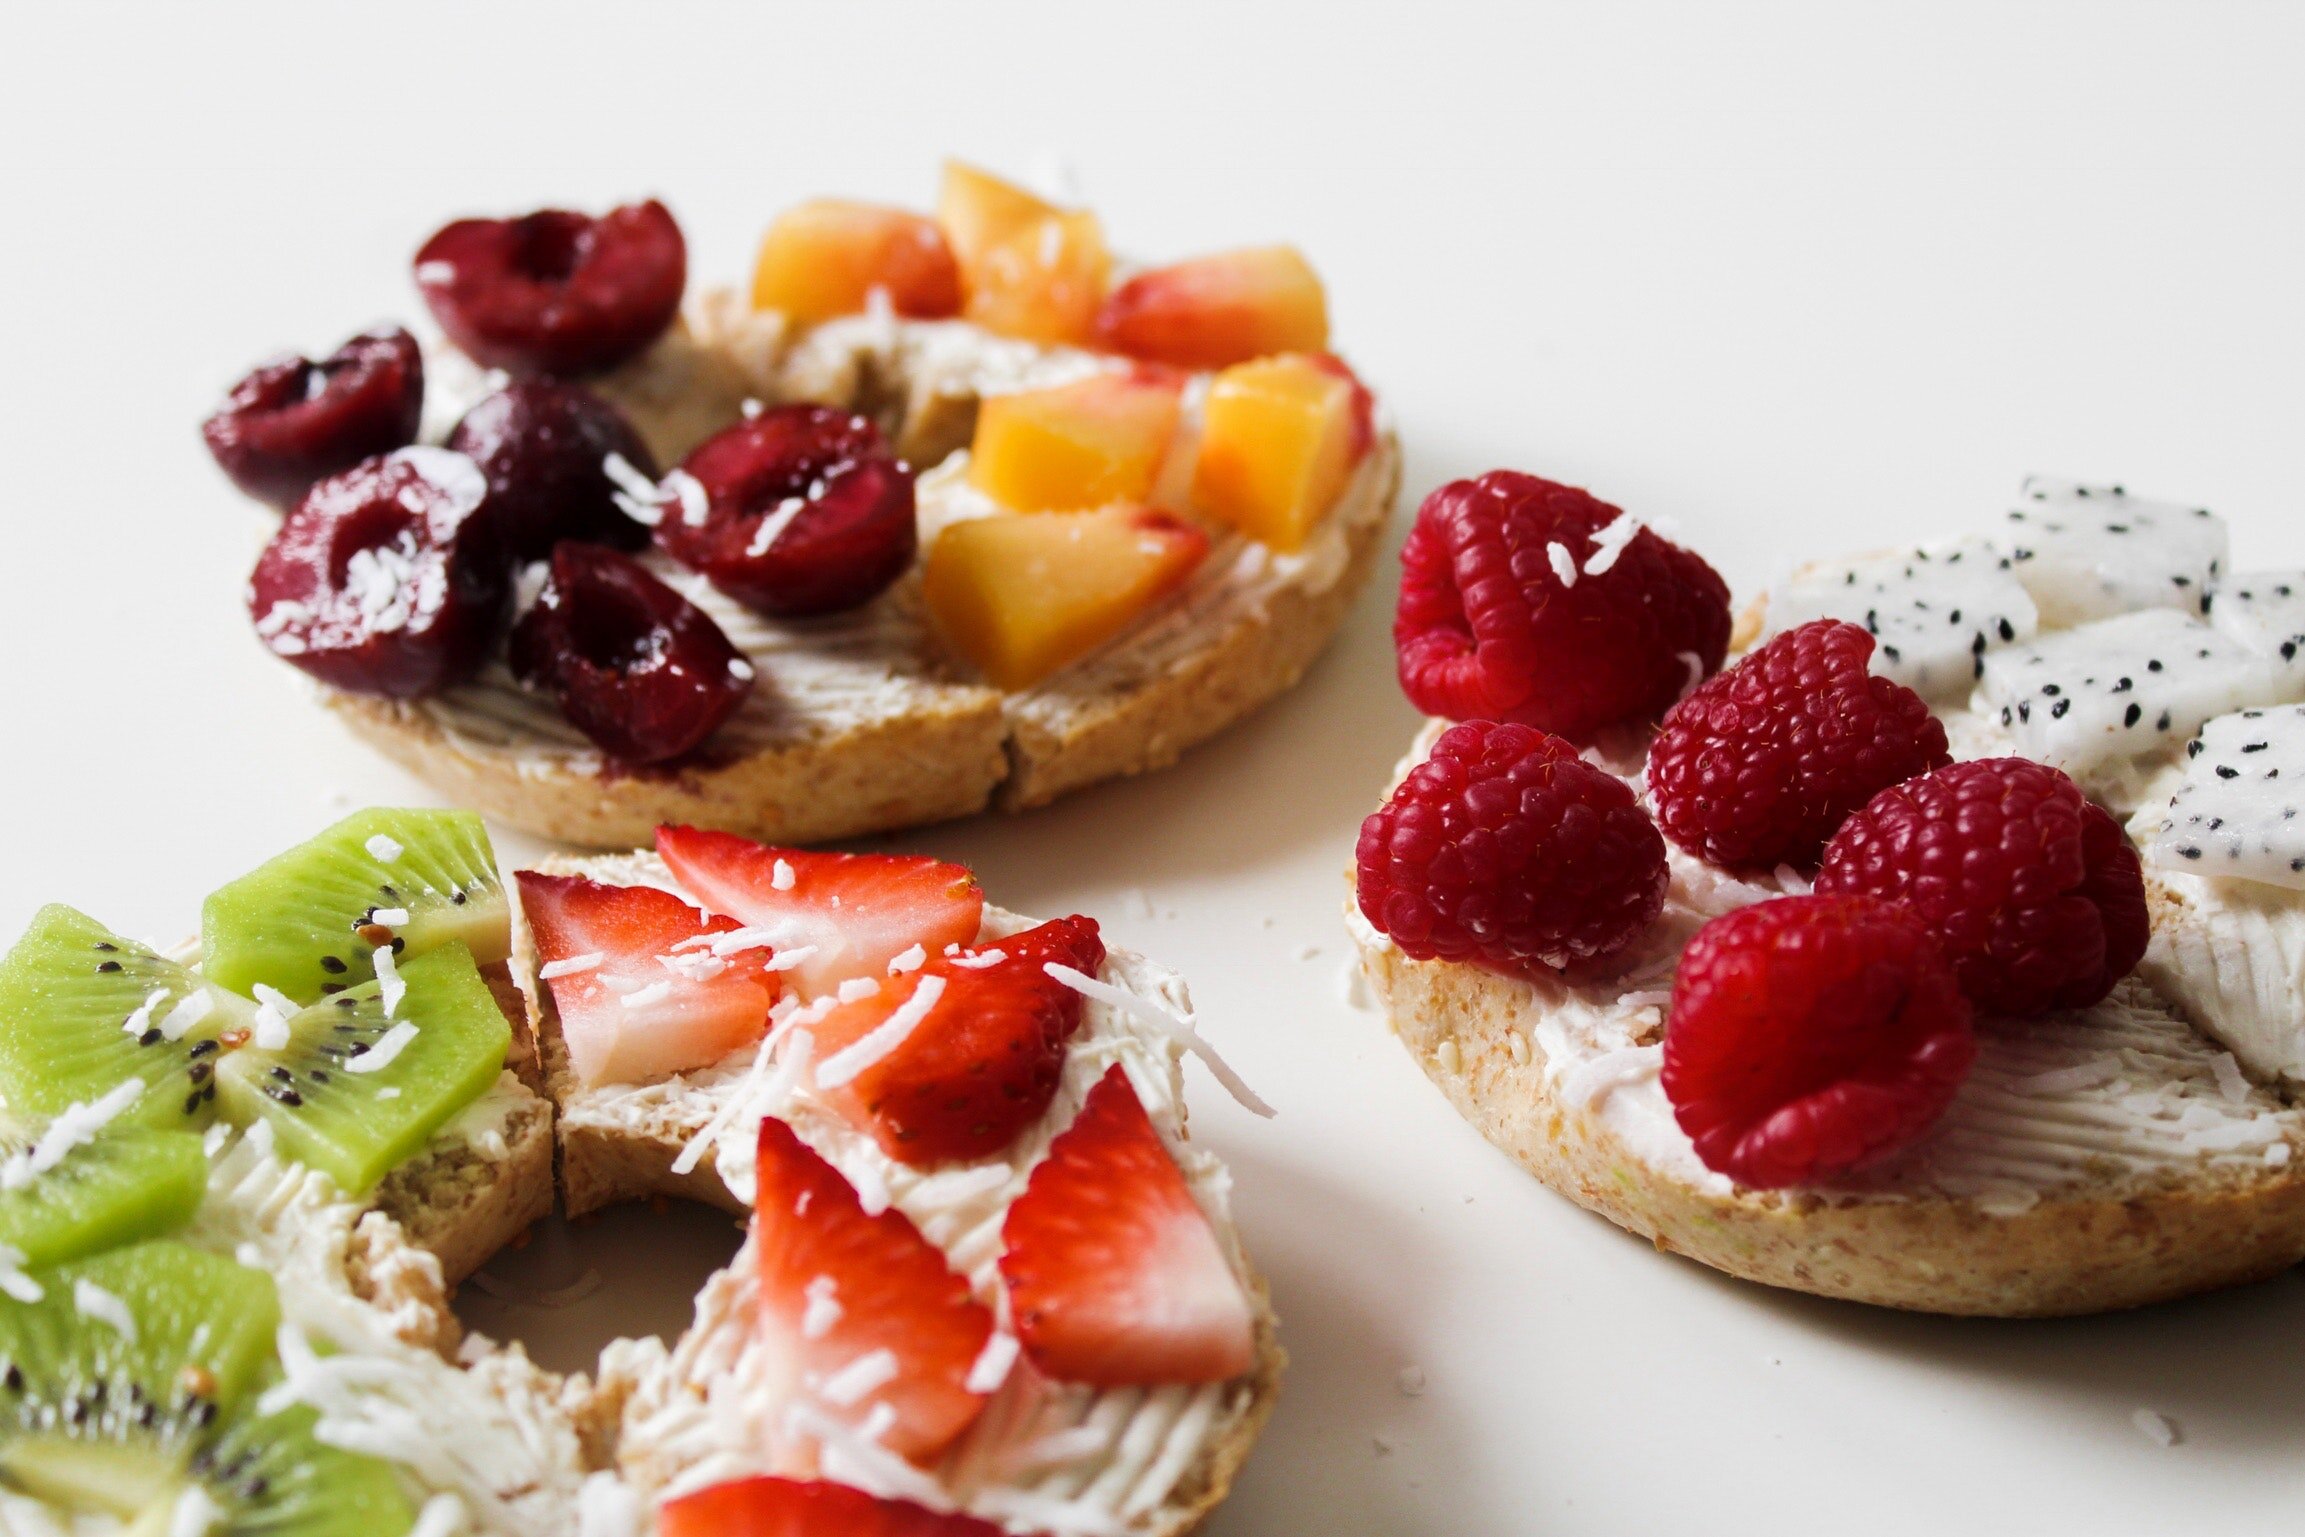 sliced-variety-of-fruits-on-round-baked-bread-946543.jpg